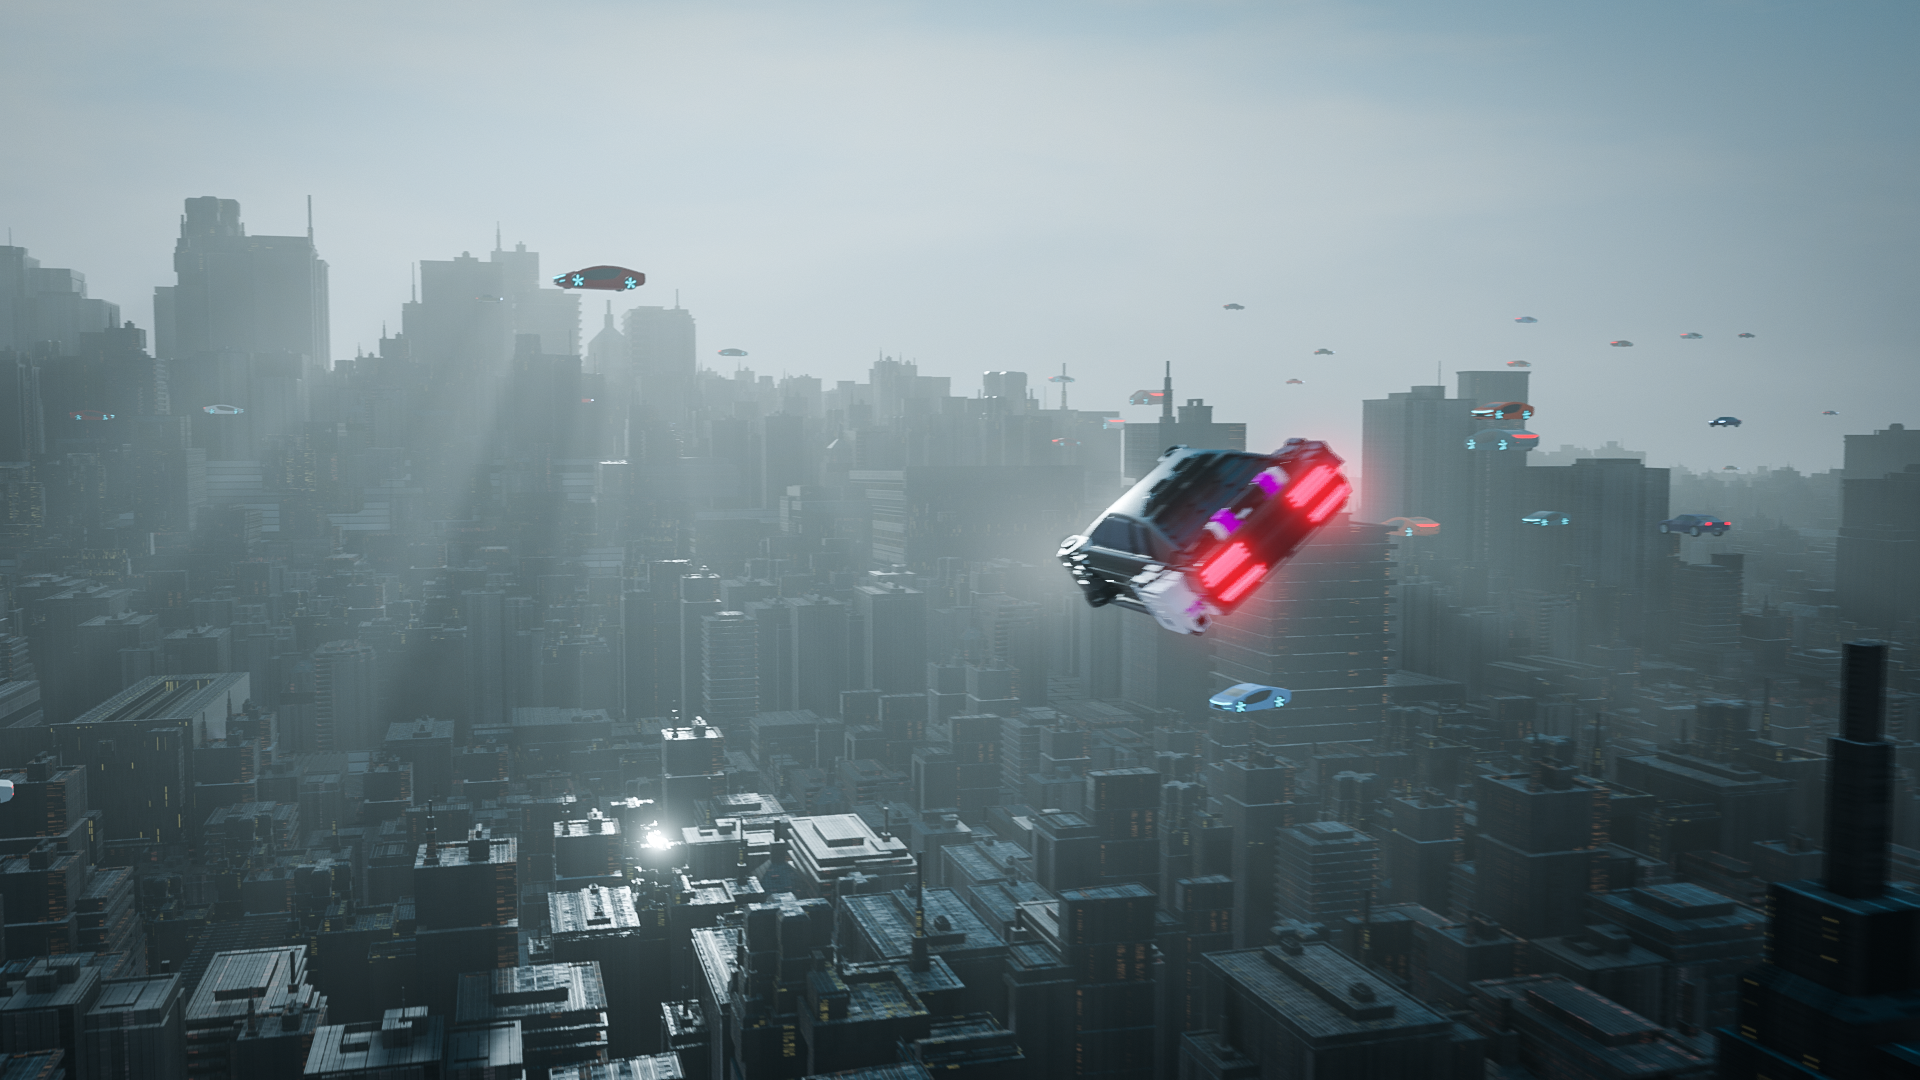 Blade runner style Cityscapes preview image 4